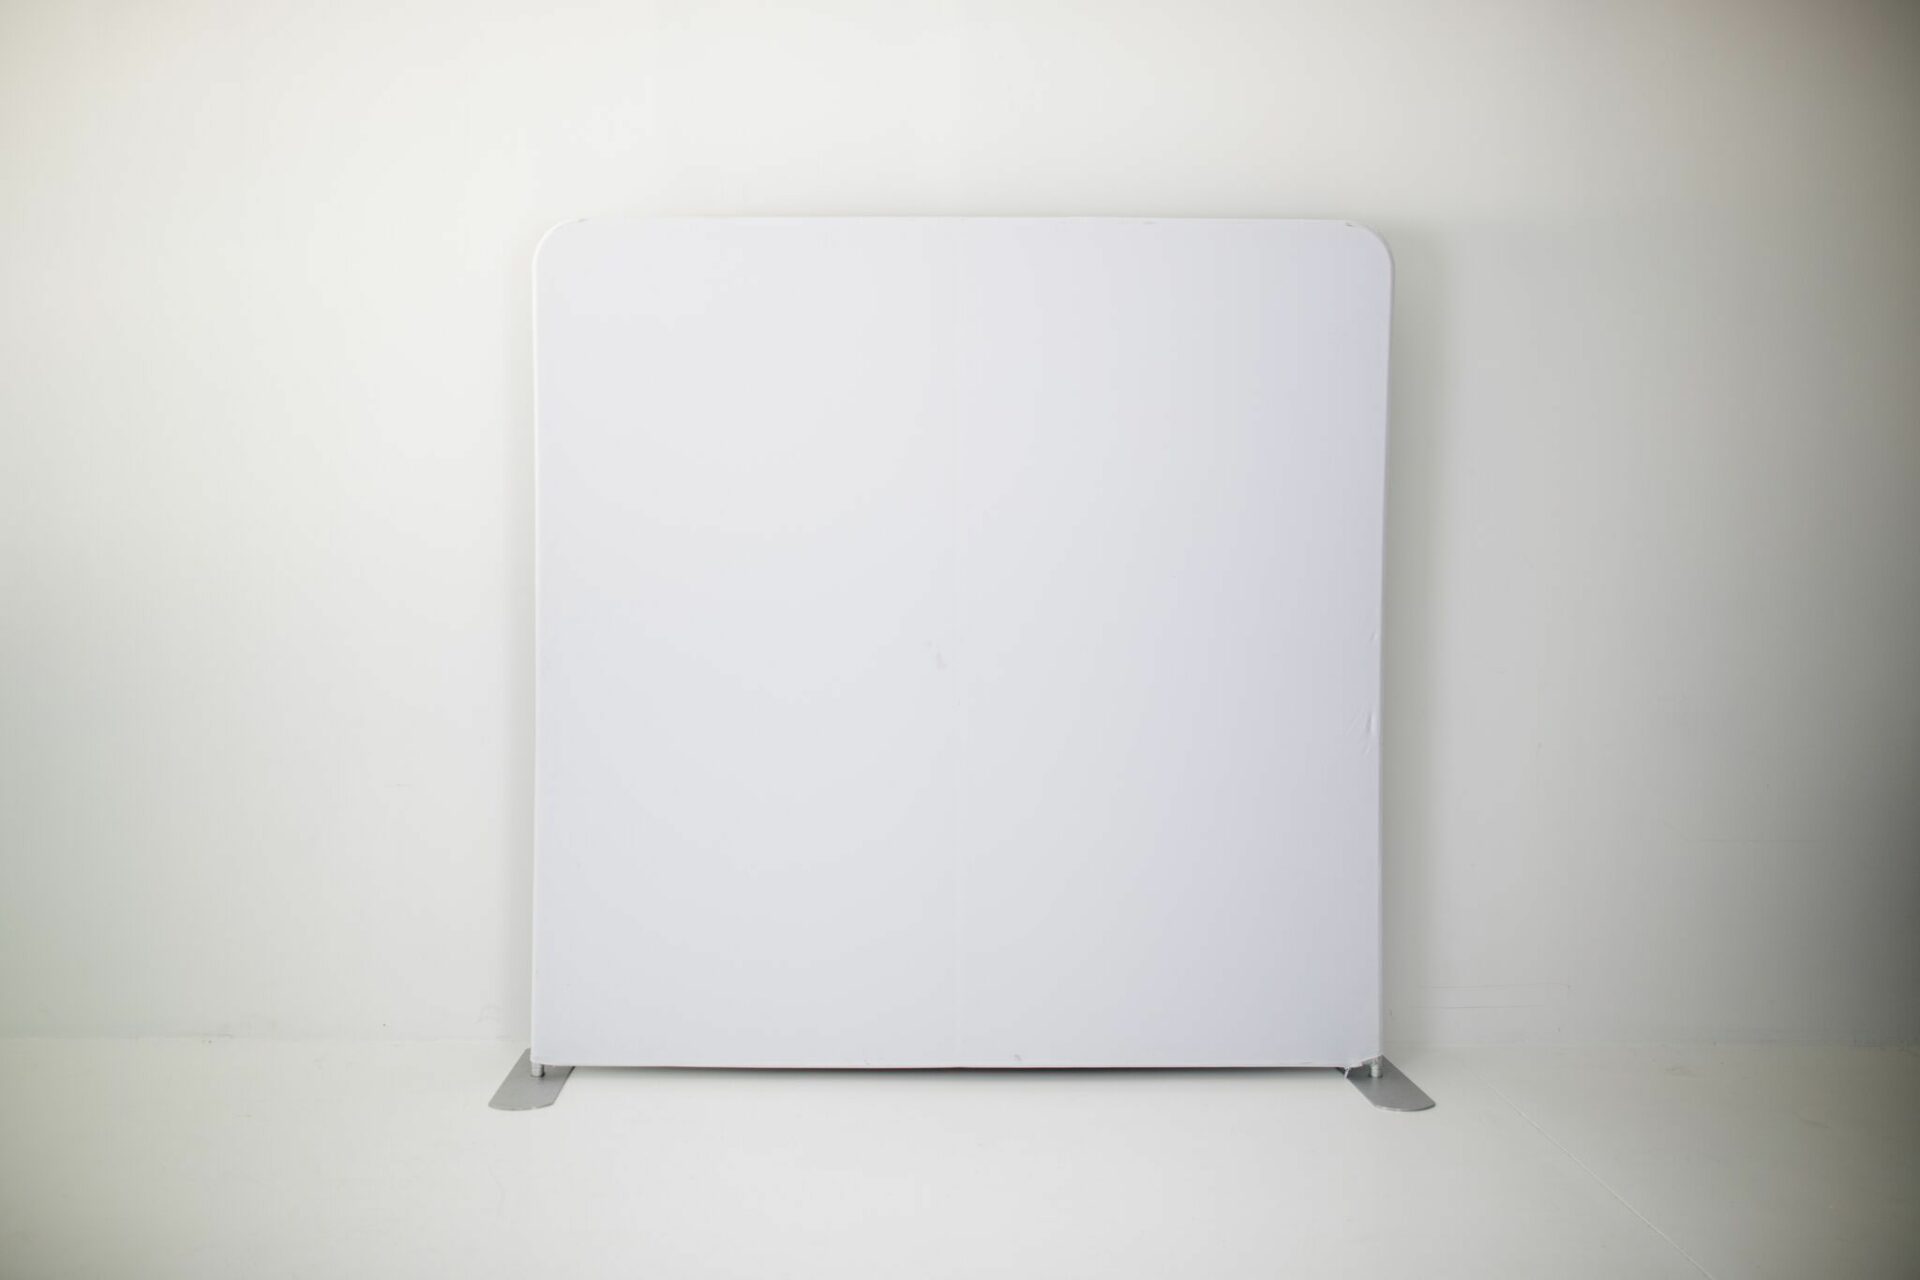 A white backdrop with a metal frame in a white room.